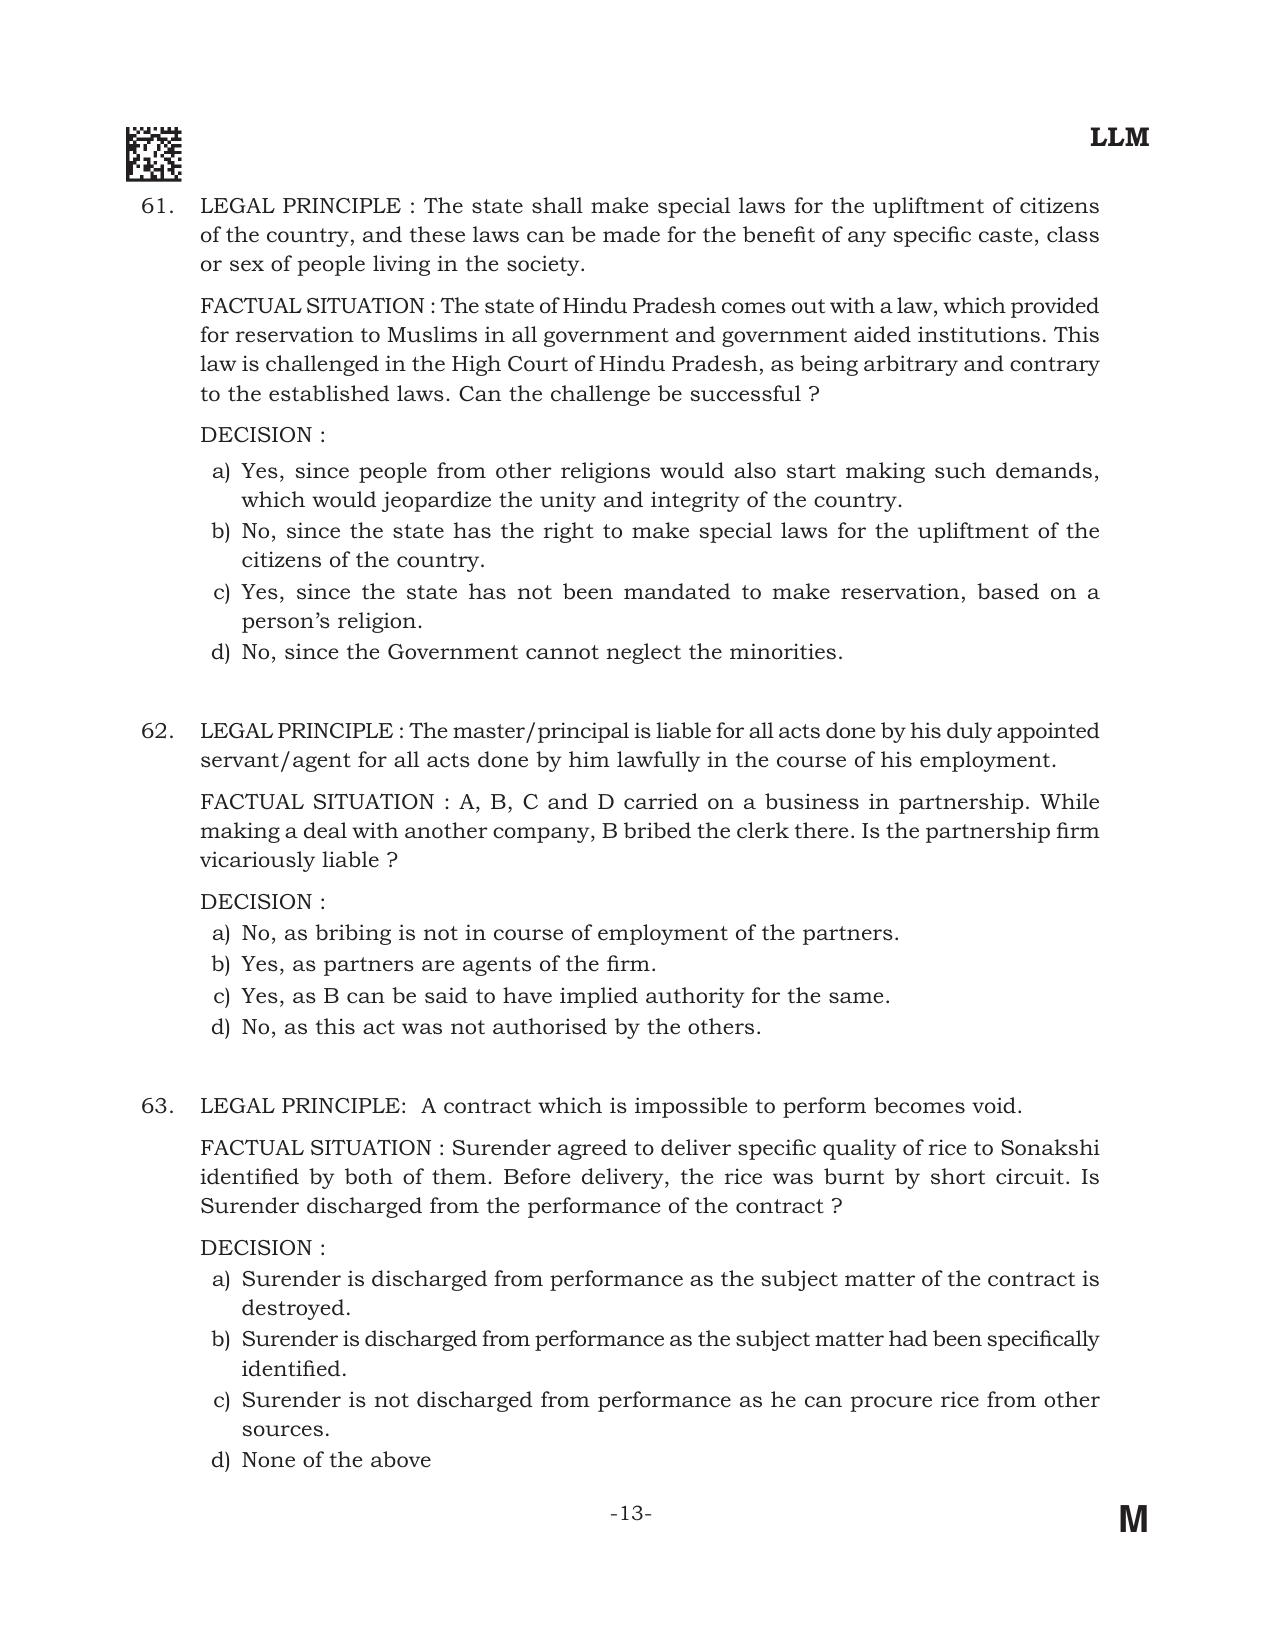 AILET 2022 Question Paper for LL.M - Page 13